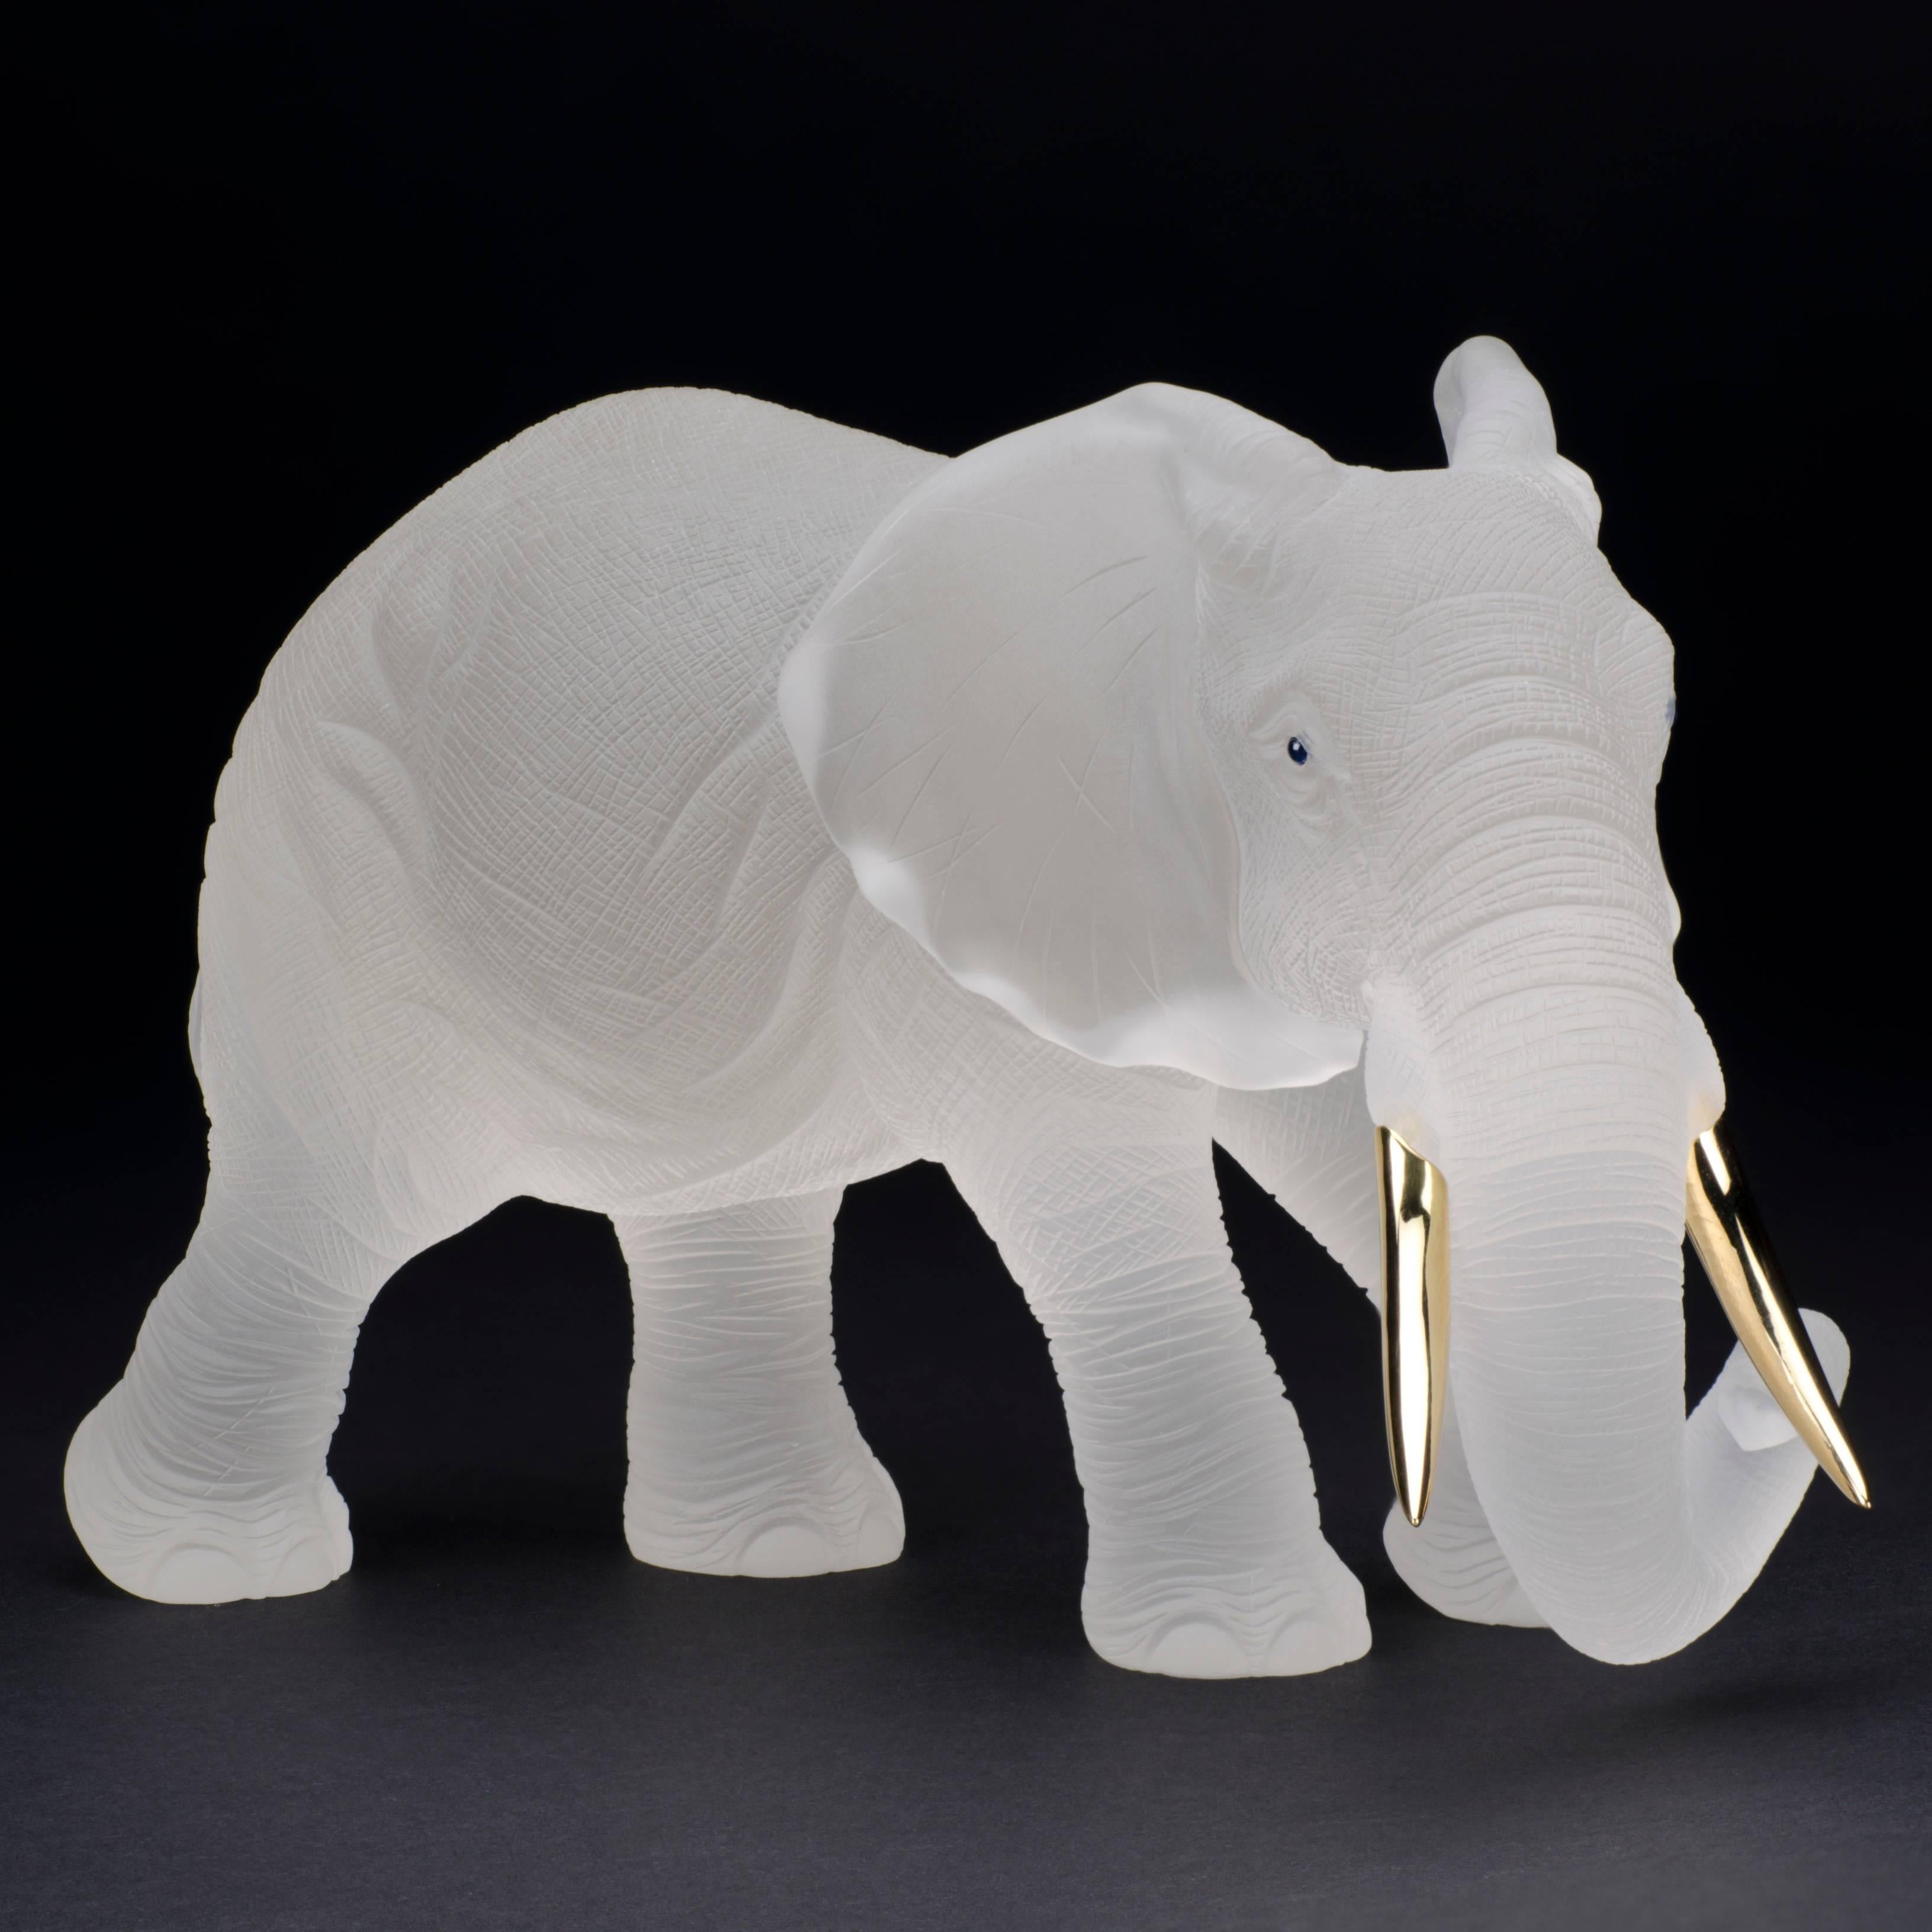 A perfectly crafted hand carved elephant created from exquisite rock crystal with a matt finish. This majestic and gentle creature features 18ct. gold tusks and sapphire cabochon eyes.
Henn are renowned worldwide both for their superlative quality